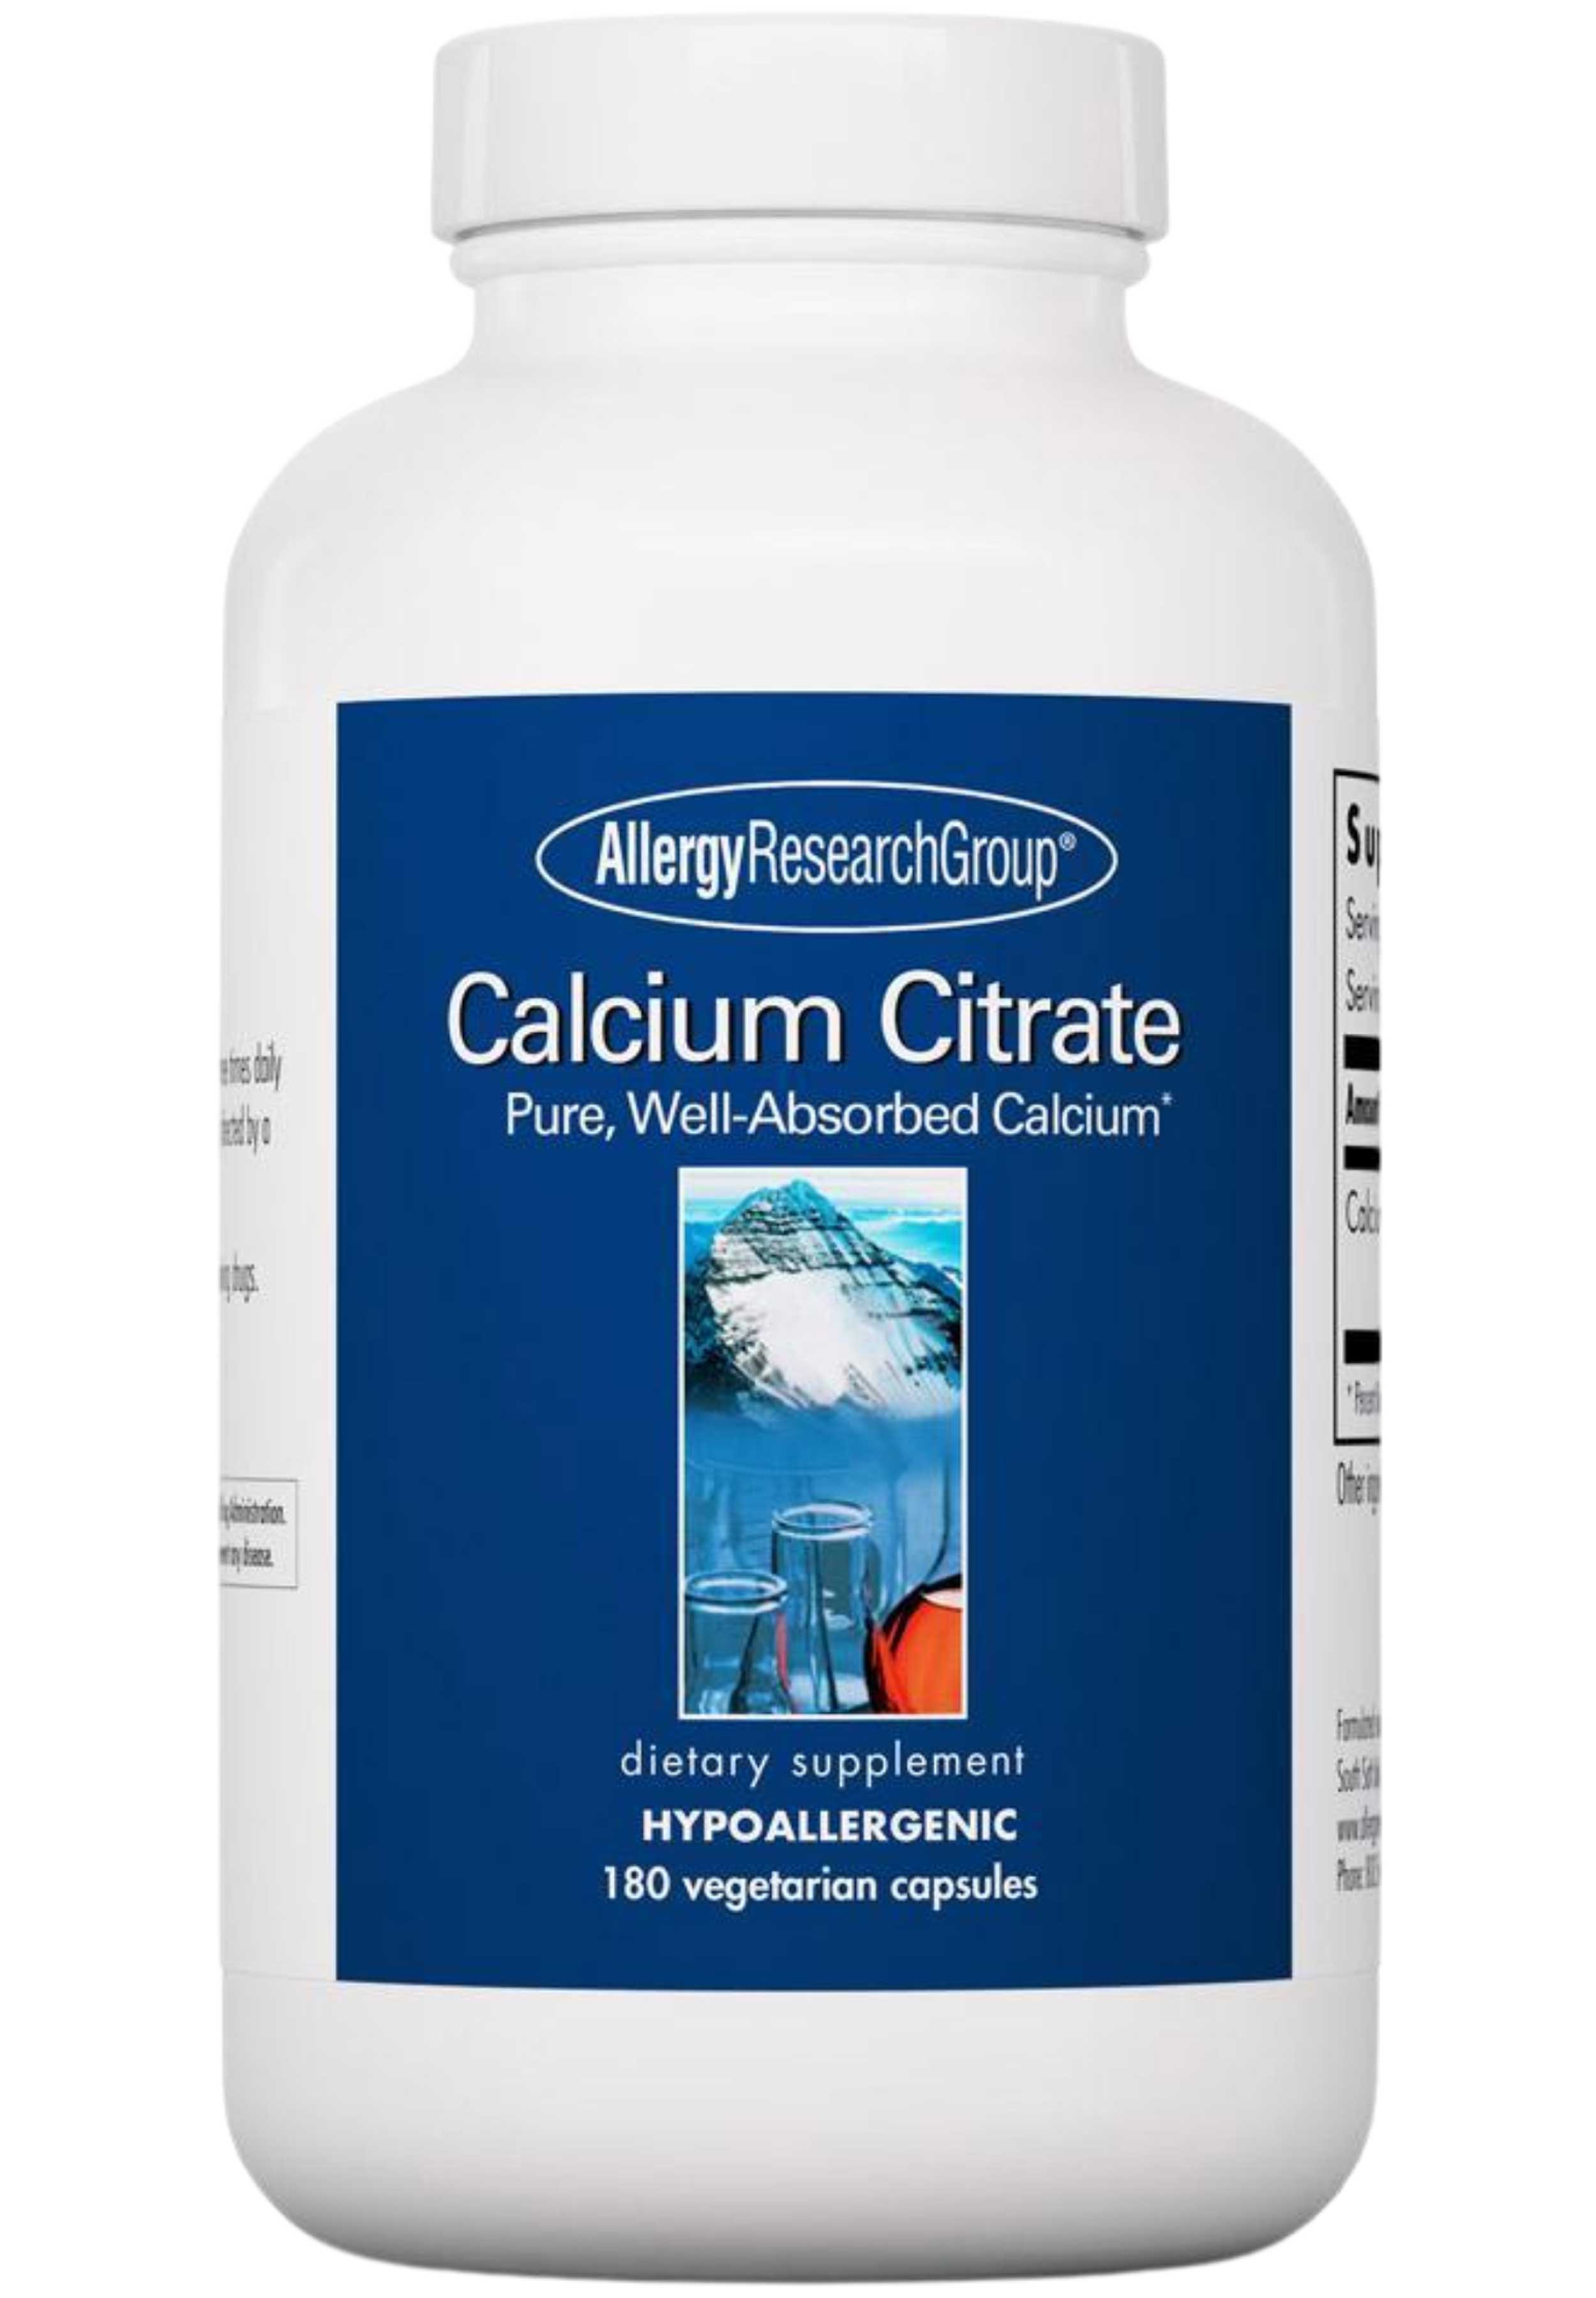 Allergy Research Group Calcium Citrate